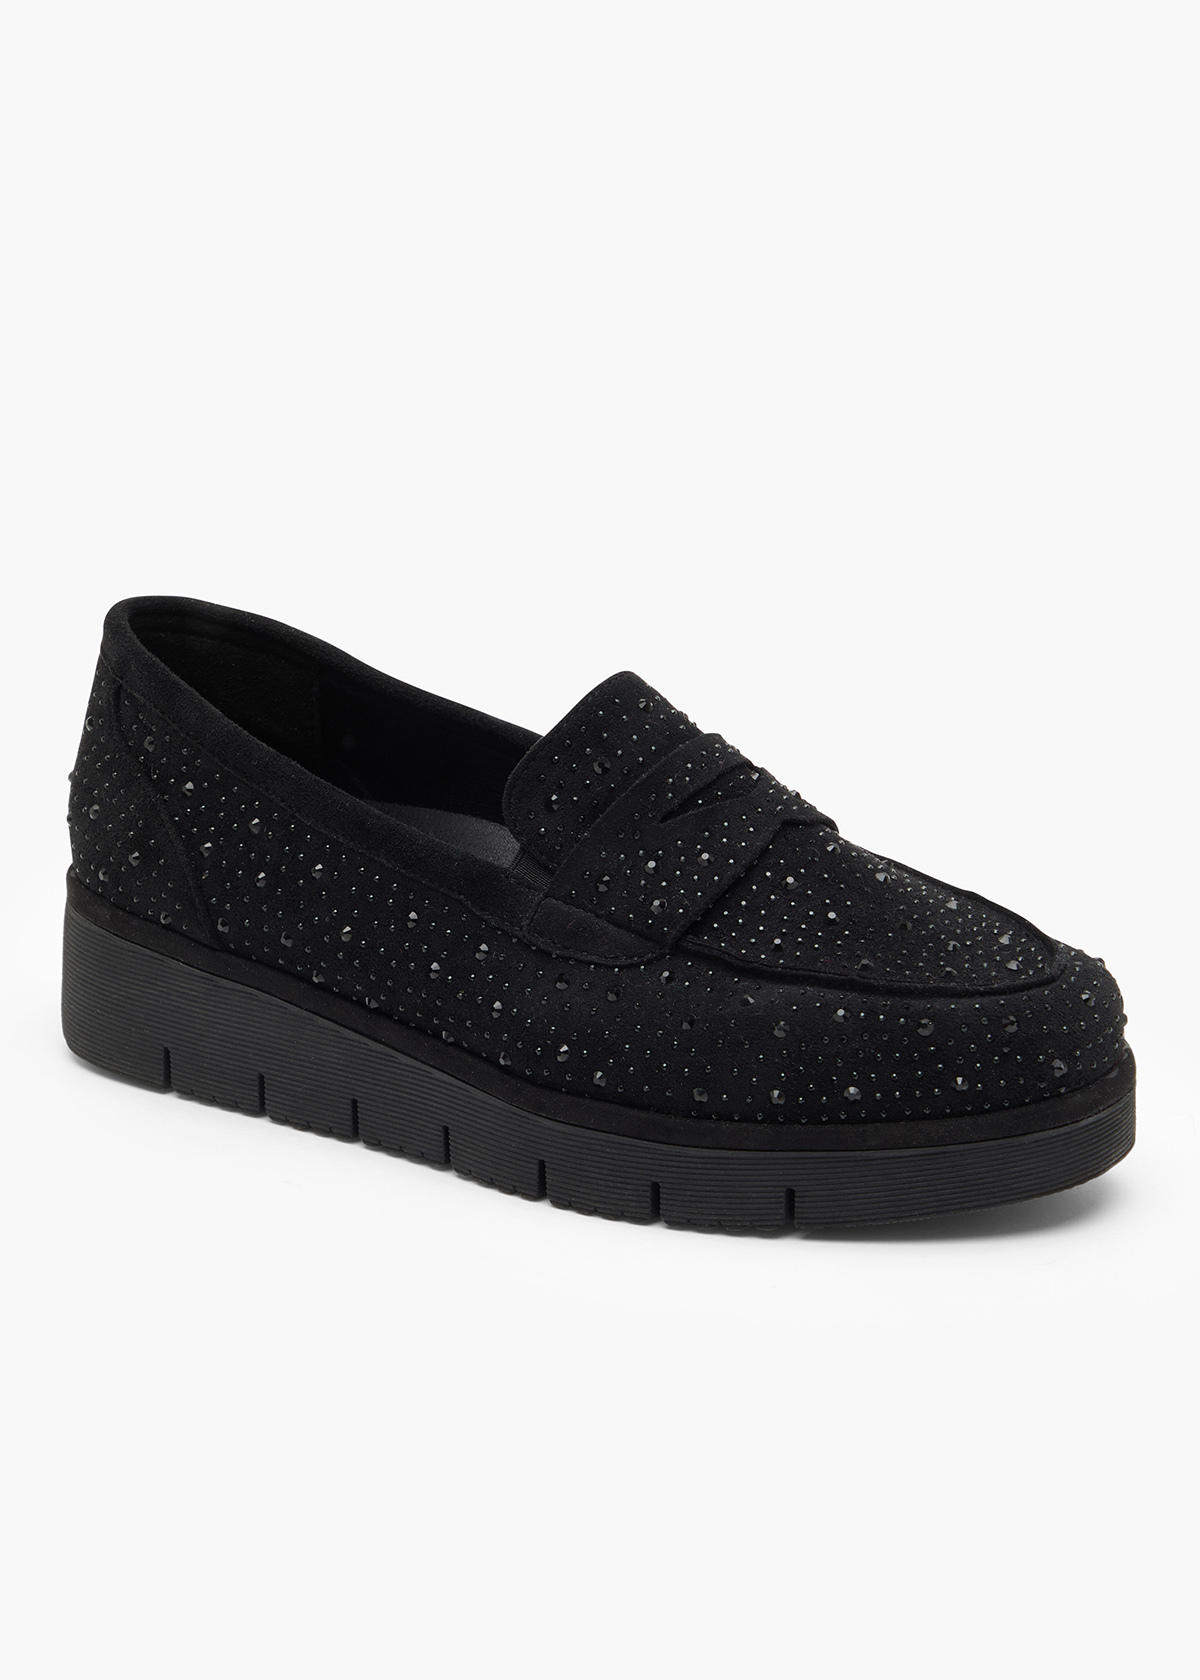 Shop Plus Size Wedge Bejewelled Loafer in Black | Sizes 12-30 | Taking ...